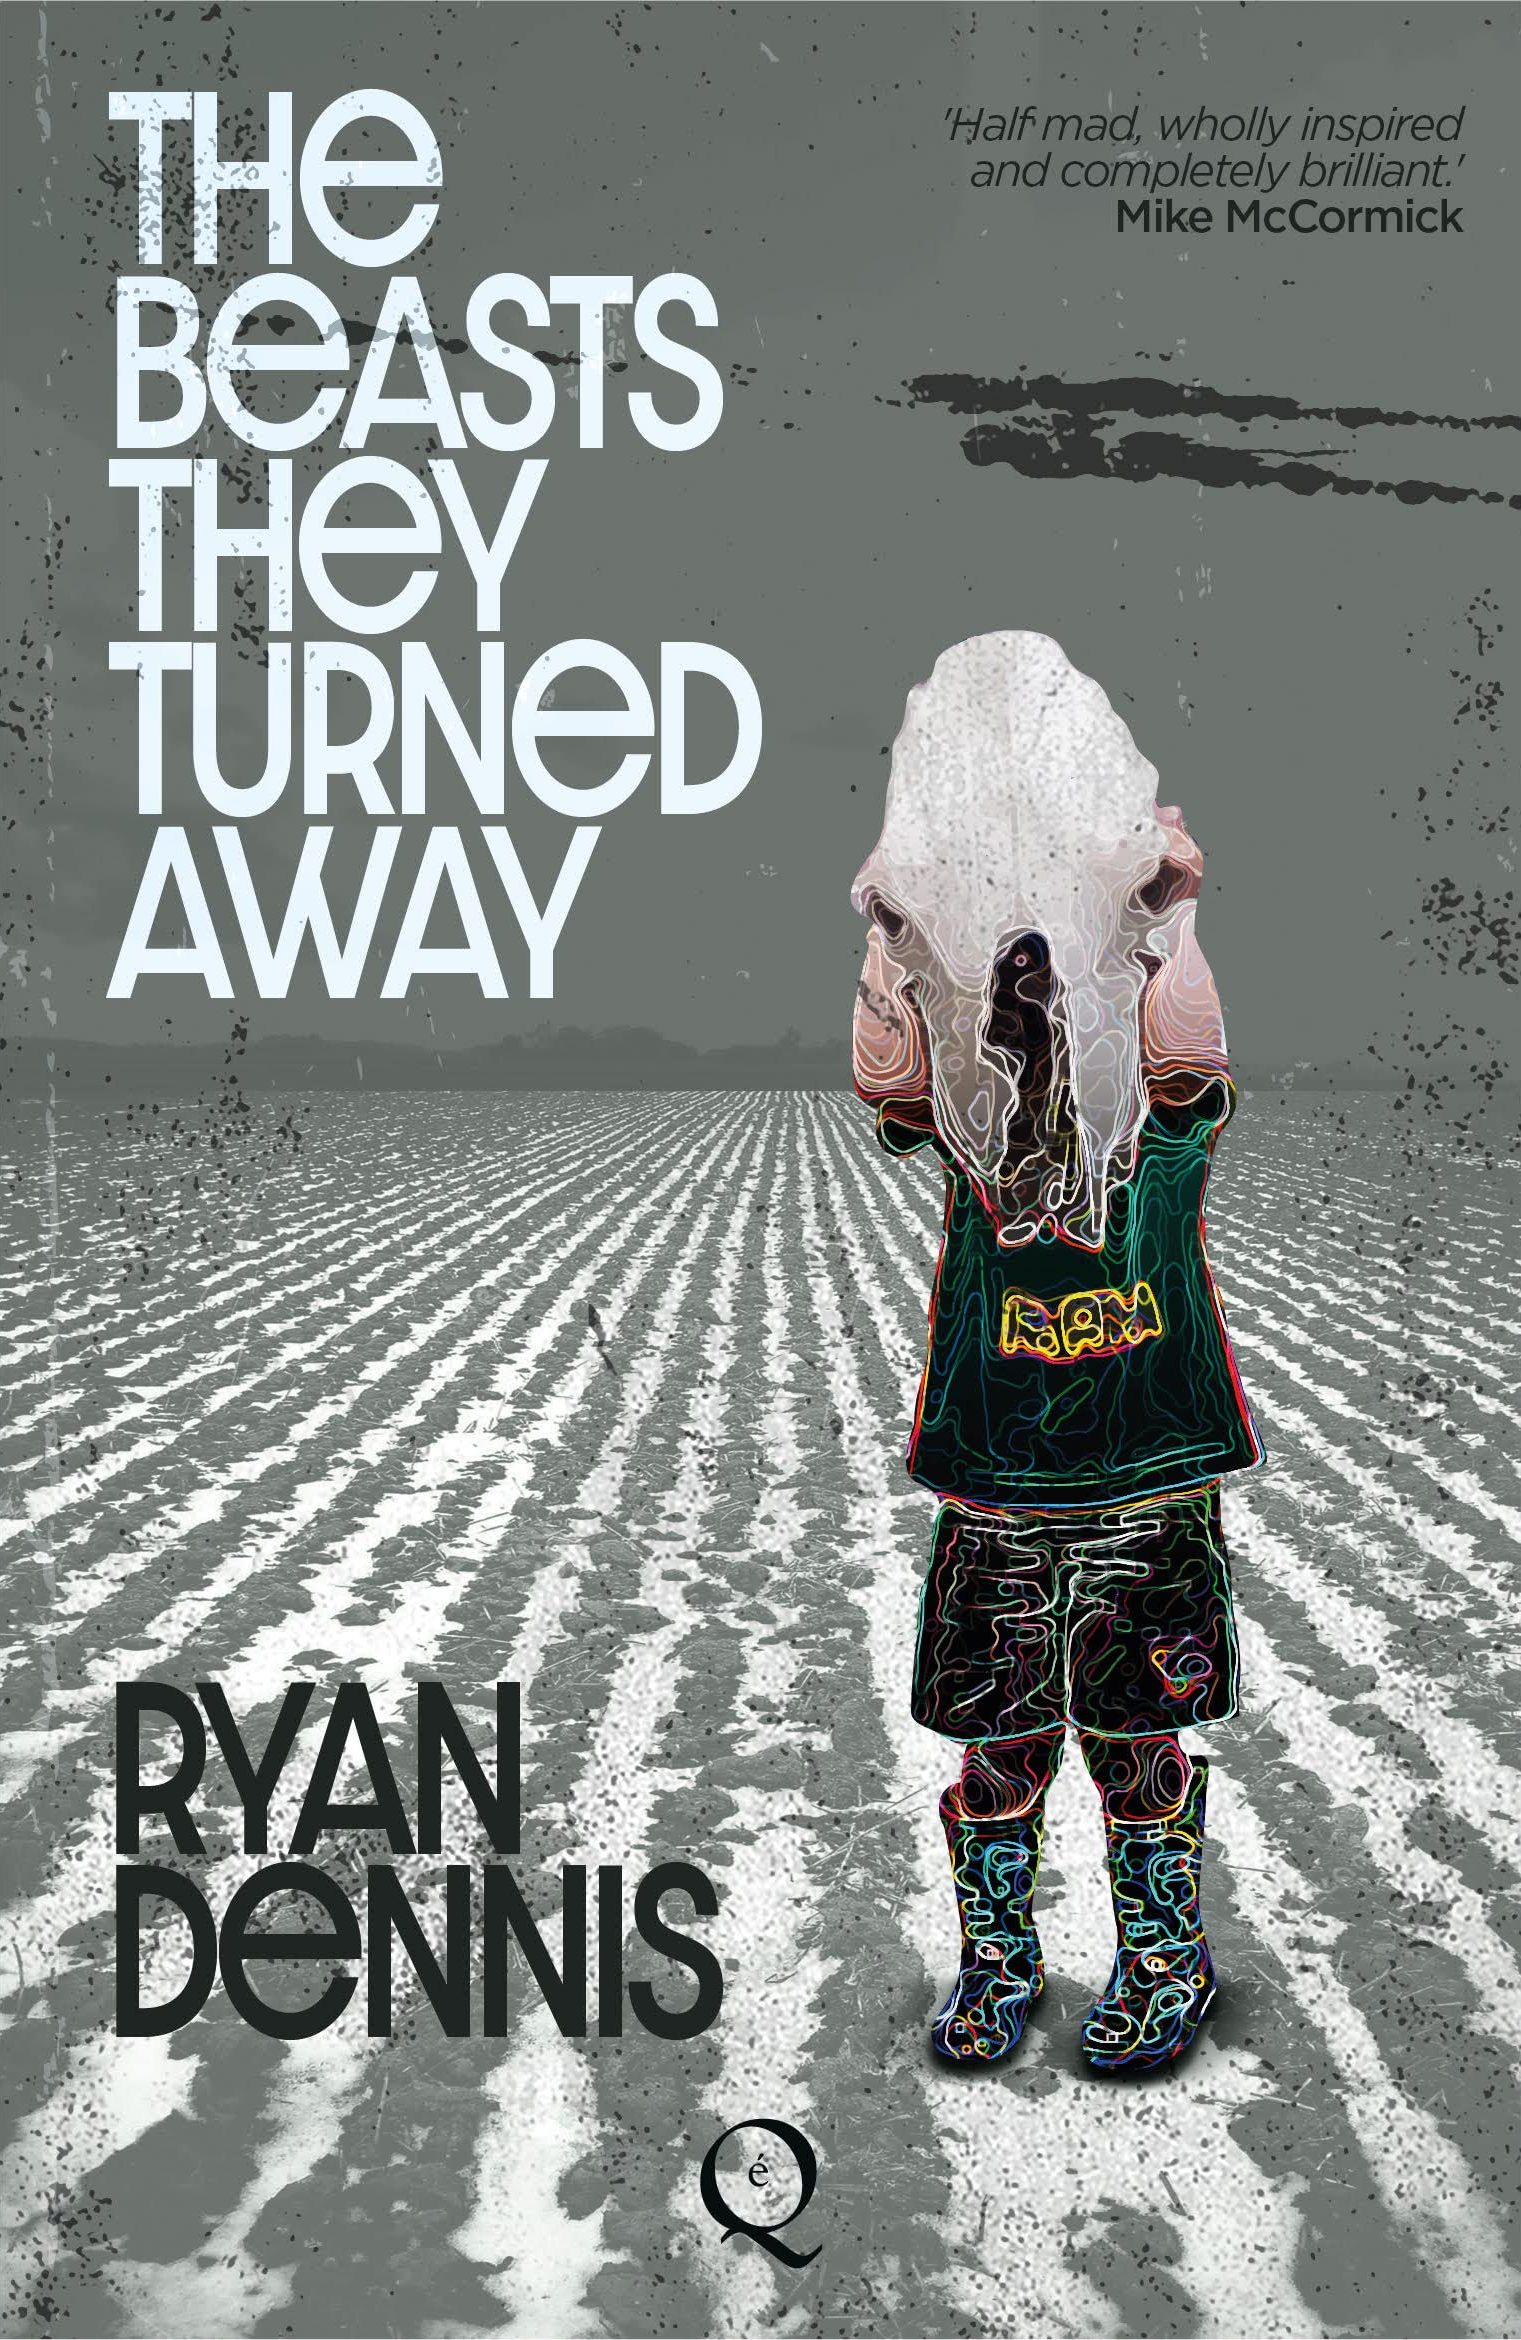 the cover for The Beasts They Turned Away by Ryan Dennis on époque press